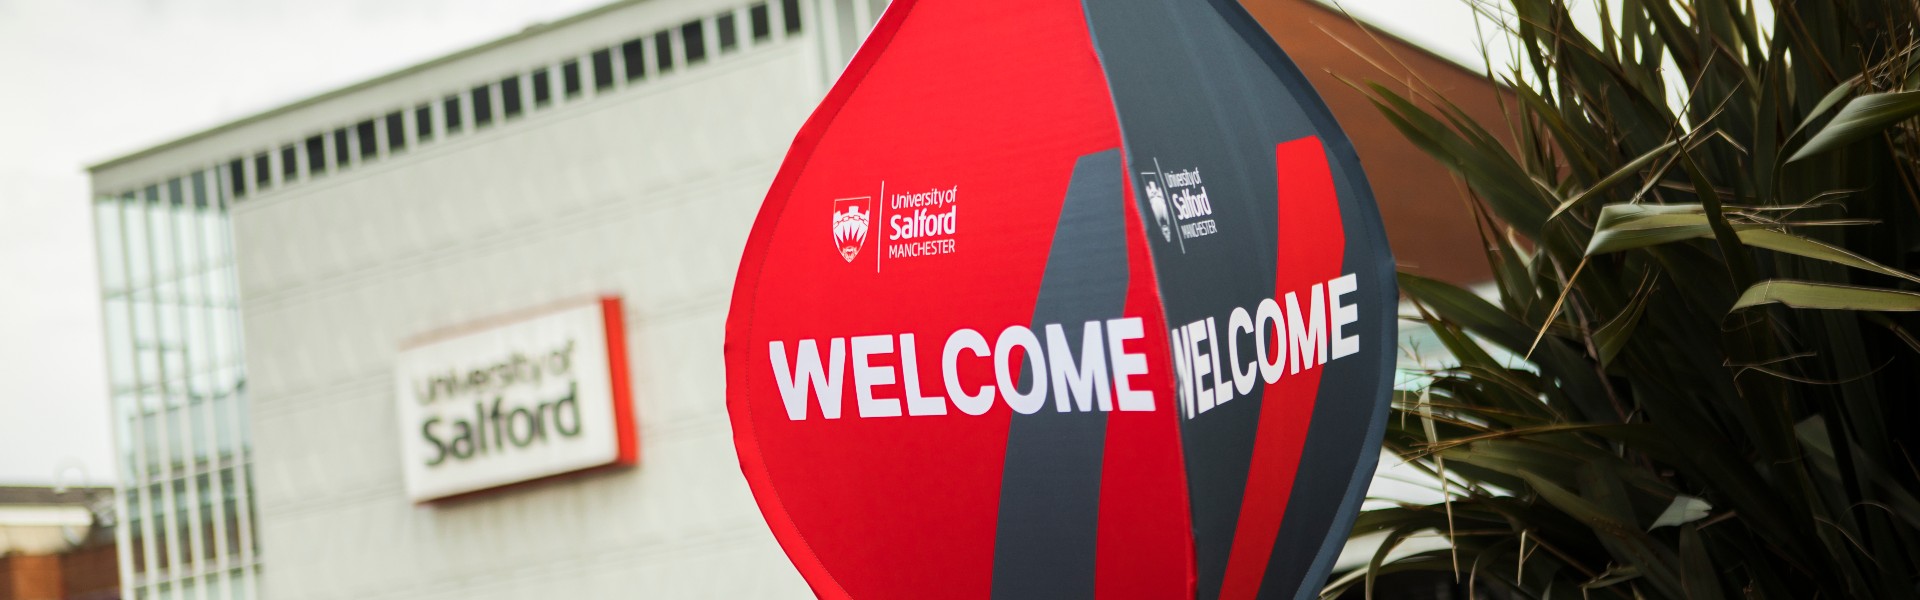 Photo of Uni of Salford welcome Balloon sign with university of Salford sign in the background blurred